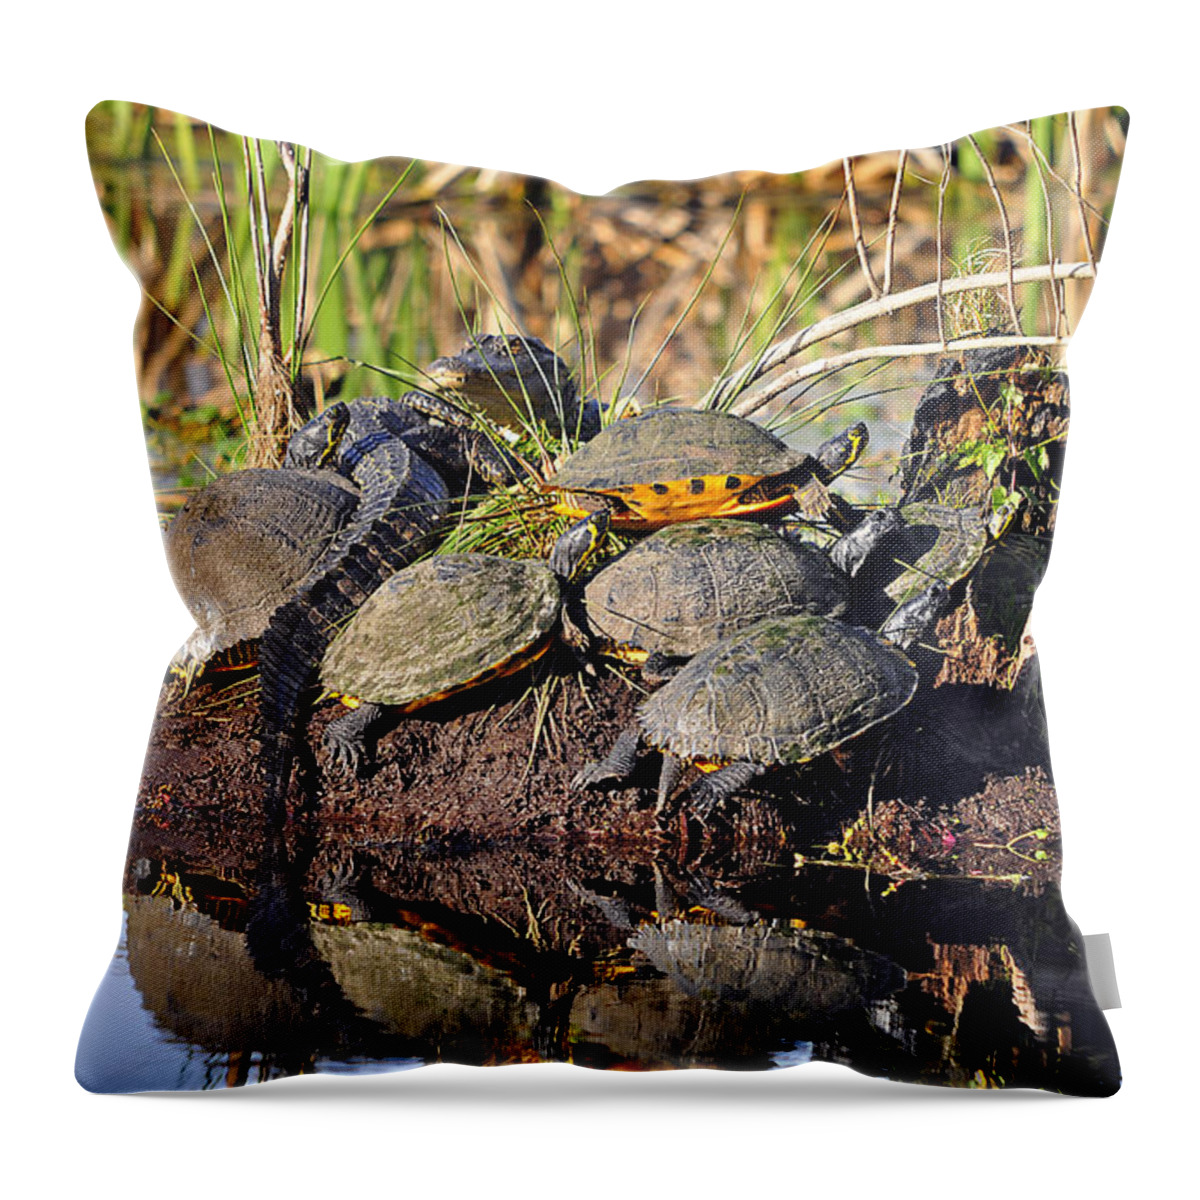 Turtle Throw Pillow featuring the photograph Reptile Refuge by Al Powell Photography USA